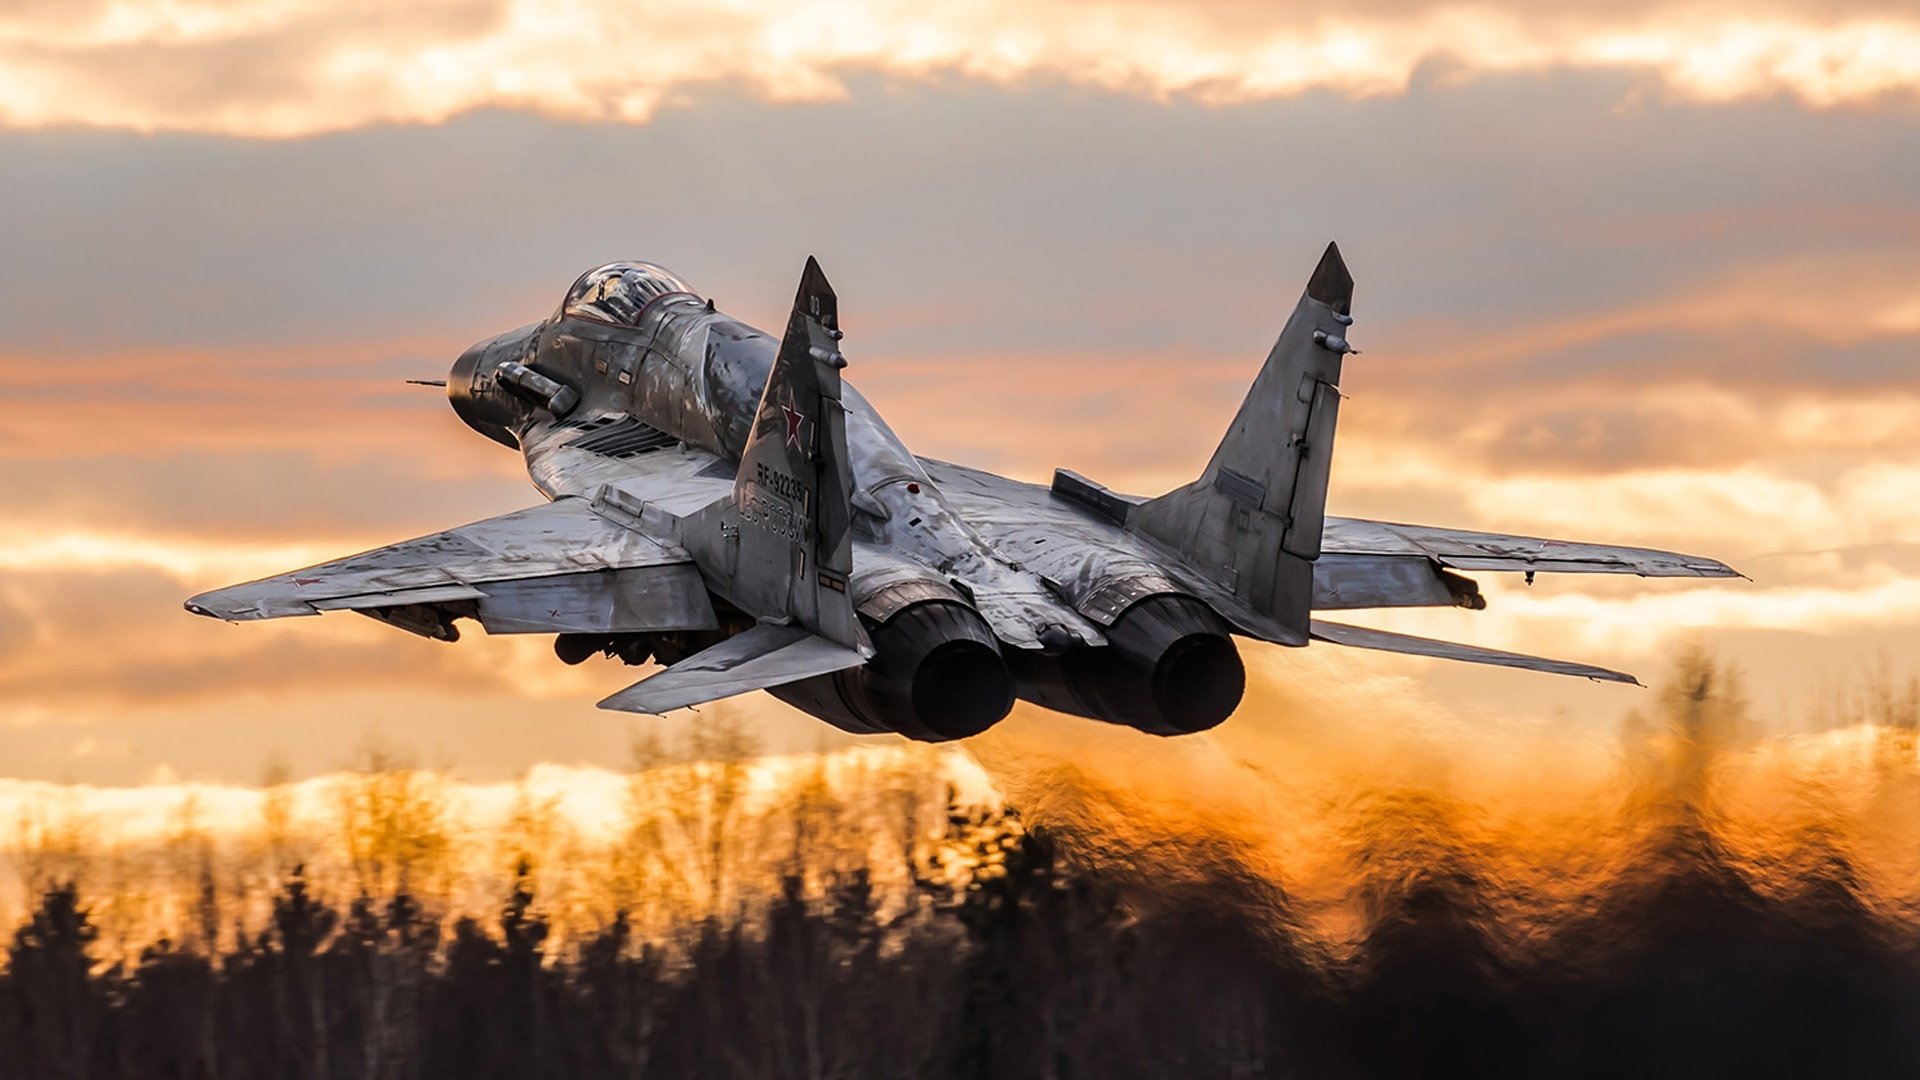 Mikoyan MiG-29 Jet Fighter Aircraft Wallpapers